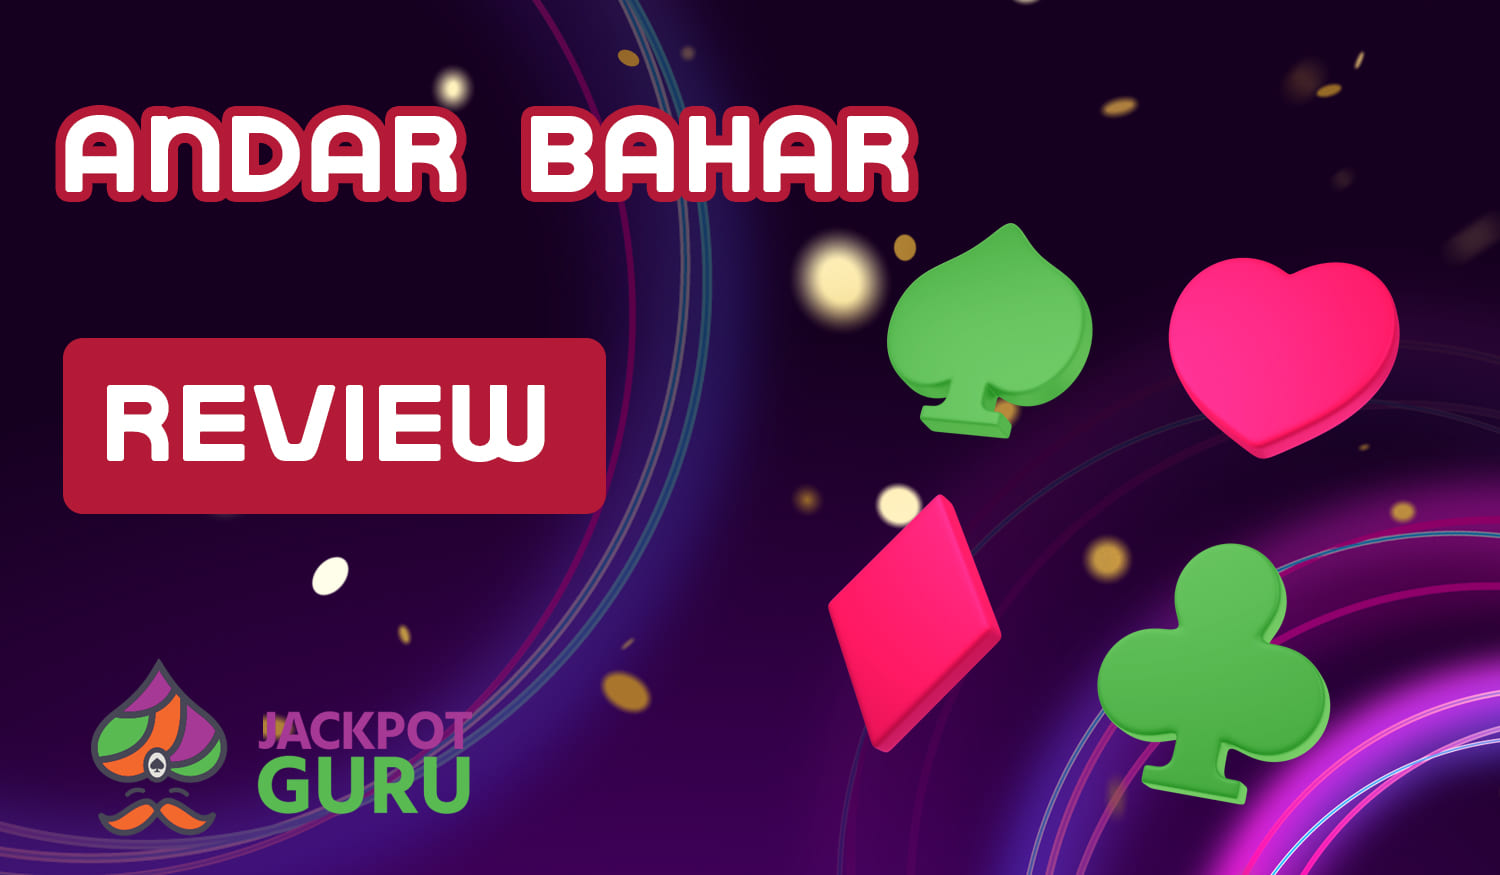 Basic rules and features of playing Andar Bahar on Jackpot Guru India